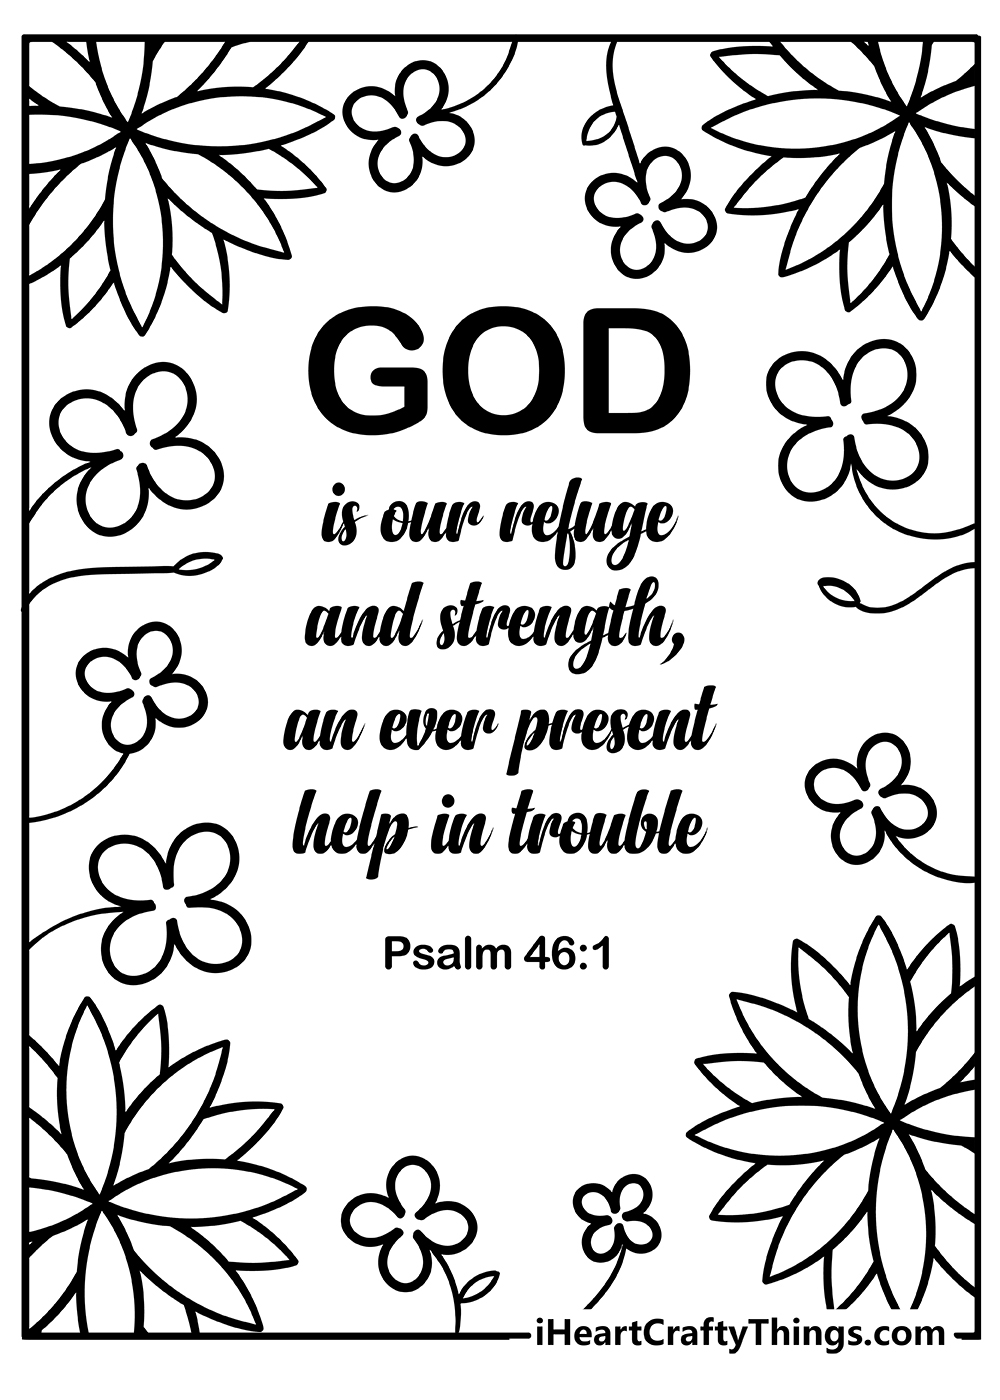 Bible Verse Coloring Pages 100 Free Printables - Free Printable Bible Coloring Pages With Scriptures